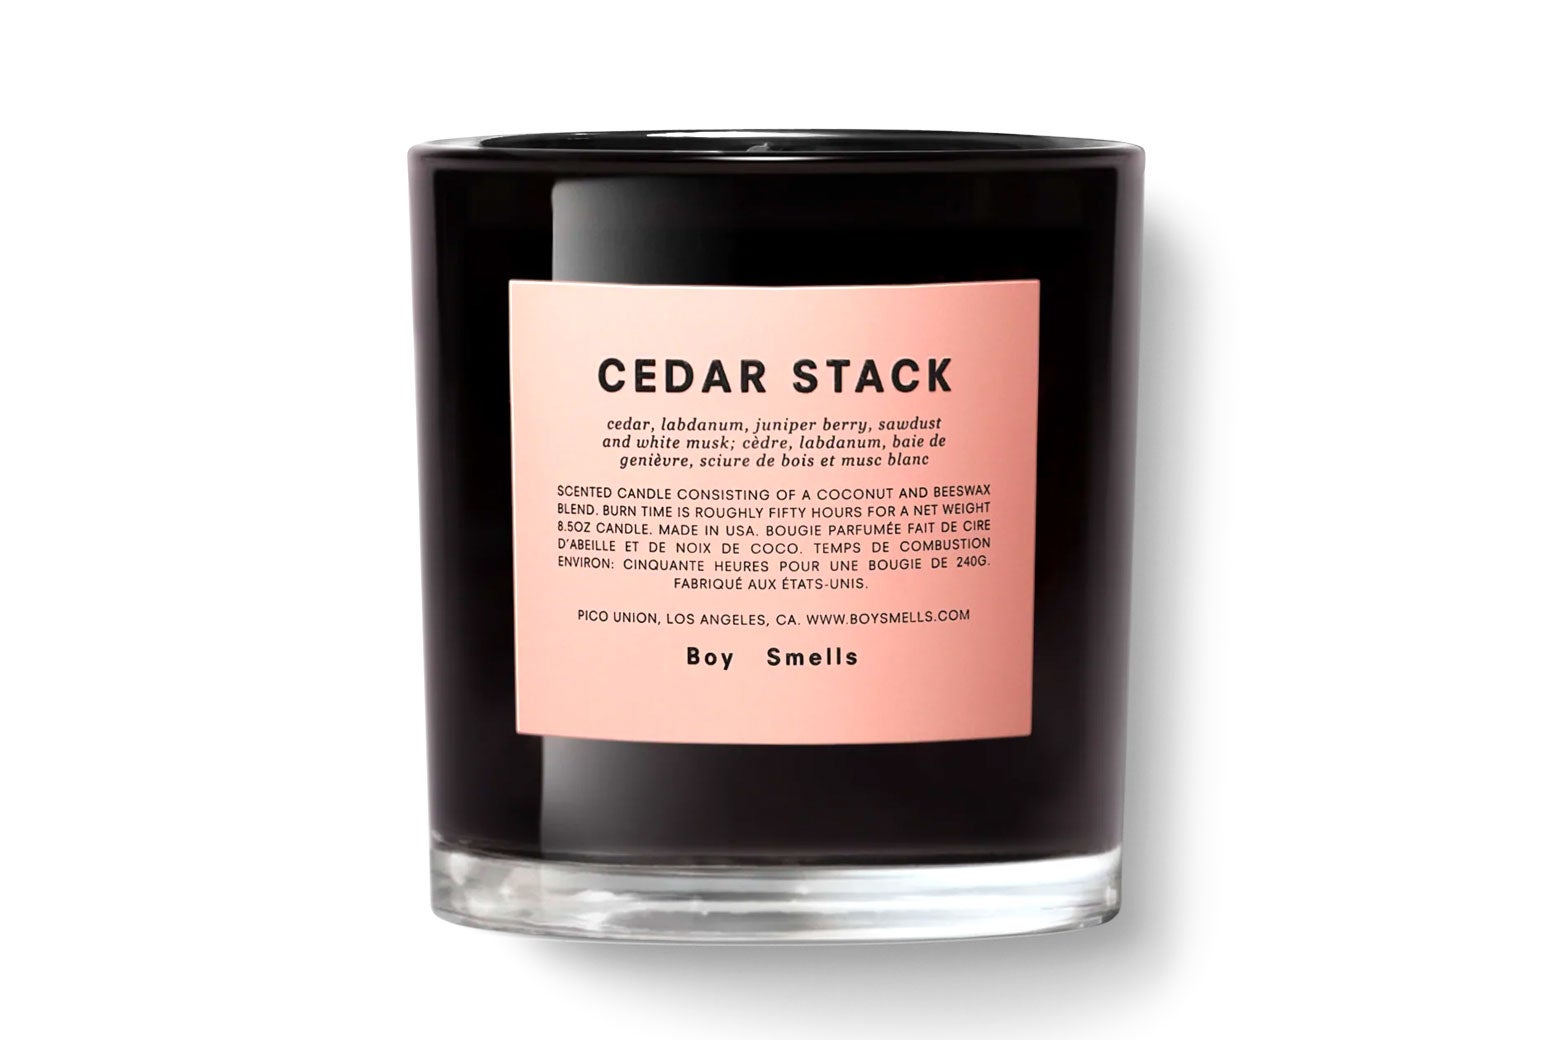 The Cedar Stack candle, a black candle with a pink label, from Boy Smells.